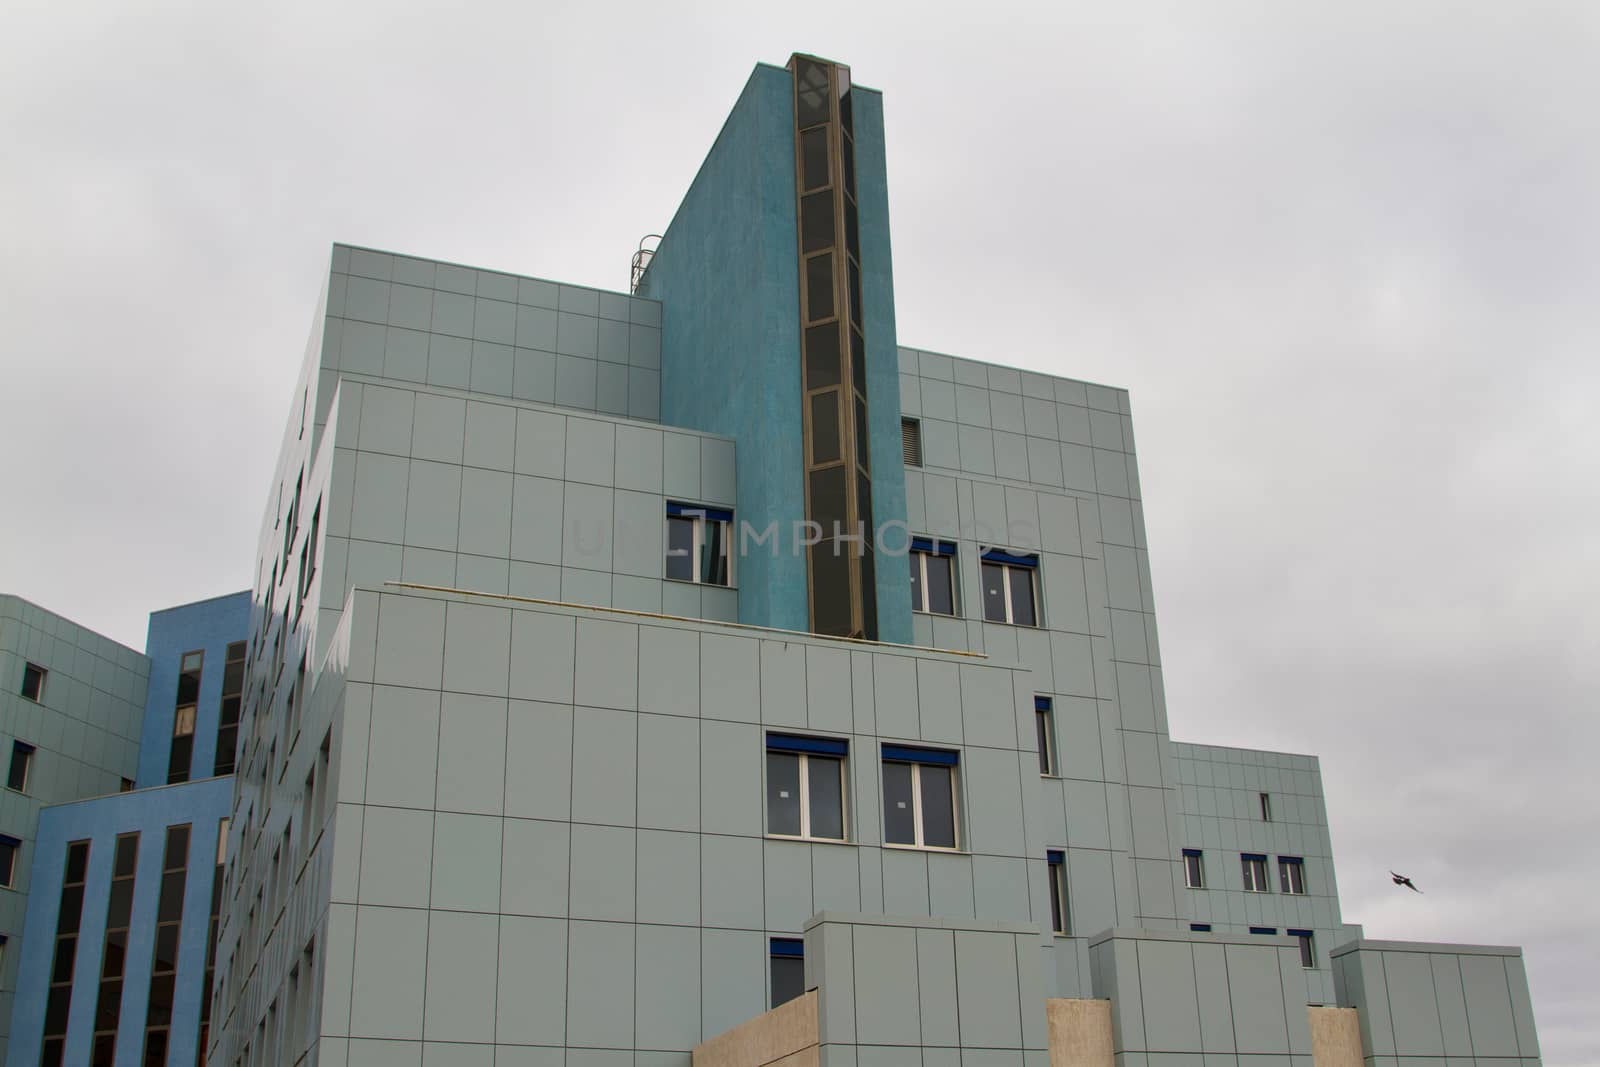 The new building of the city hospital